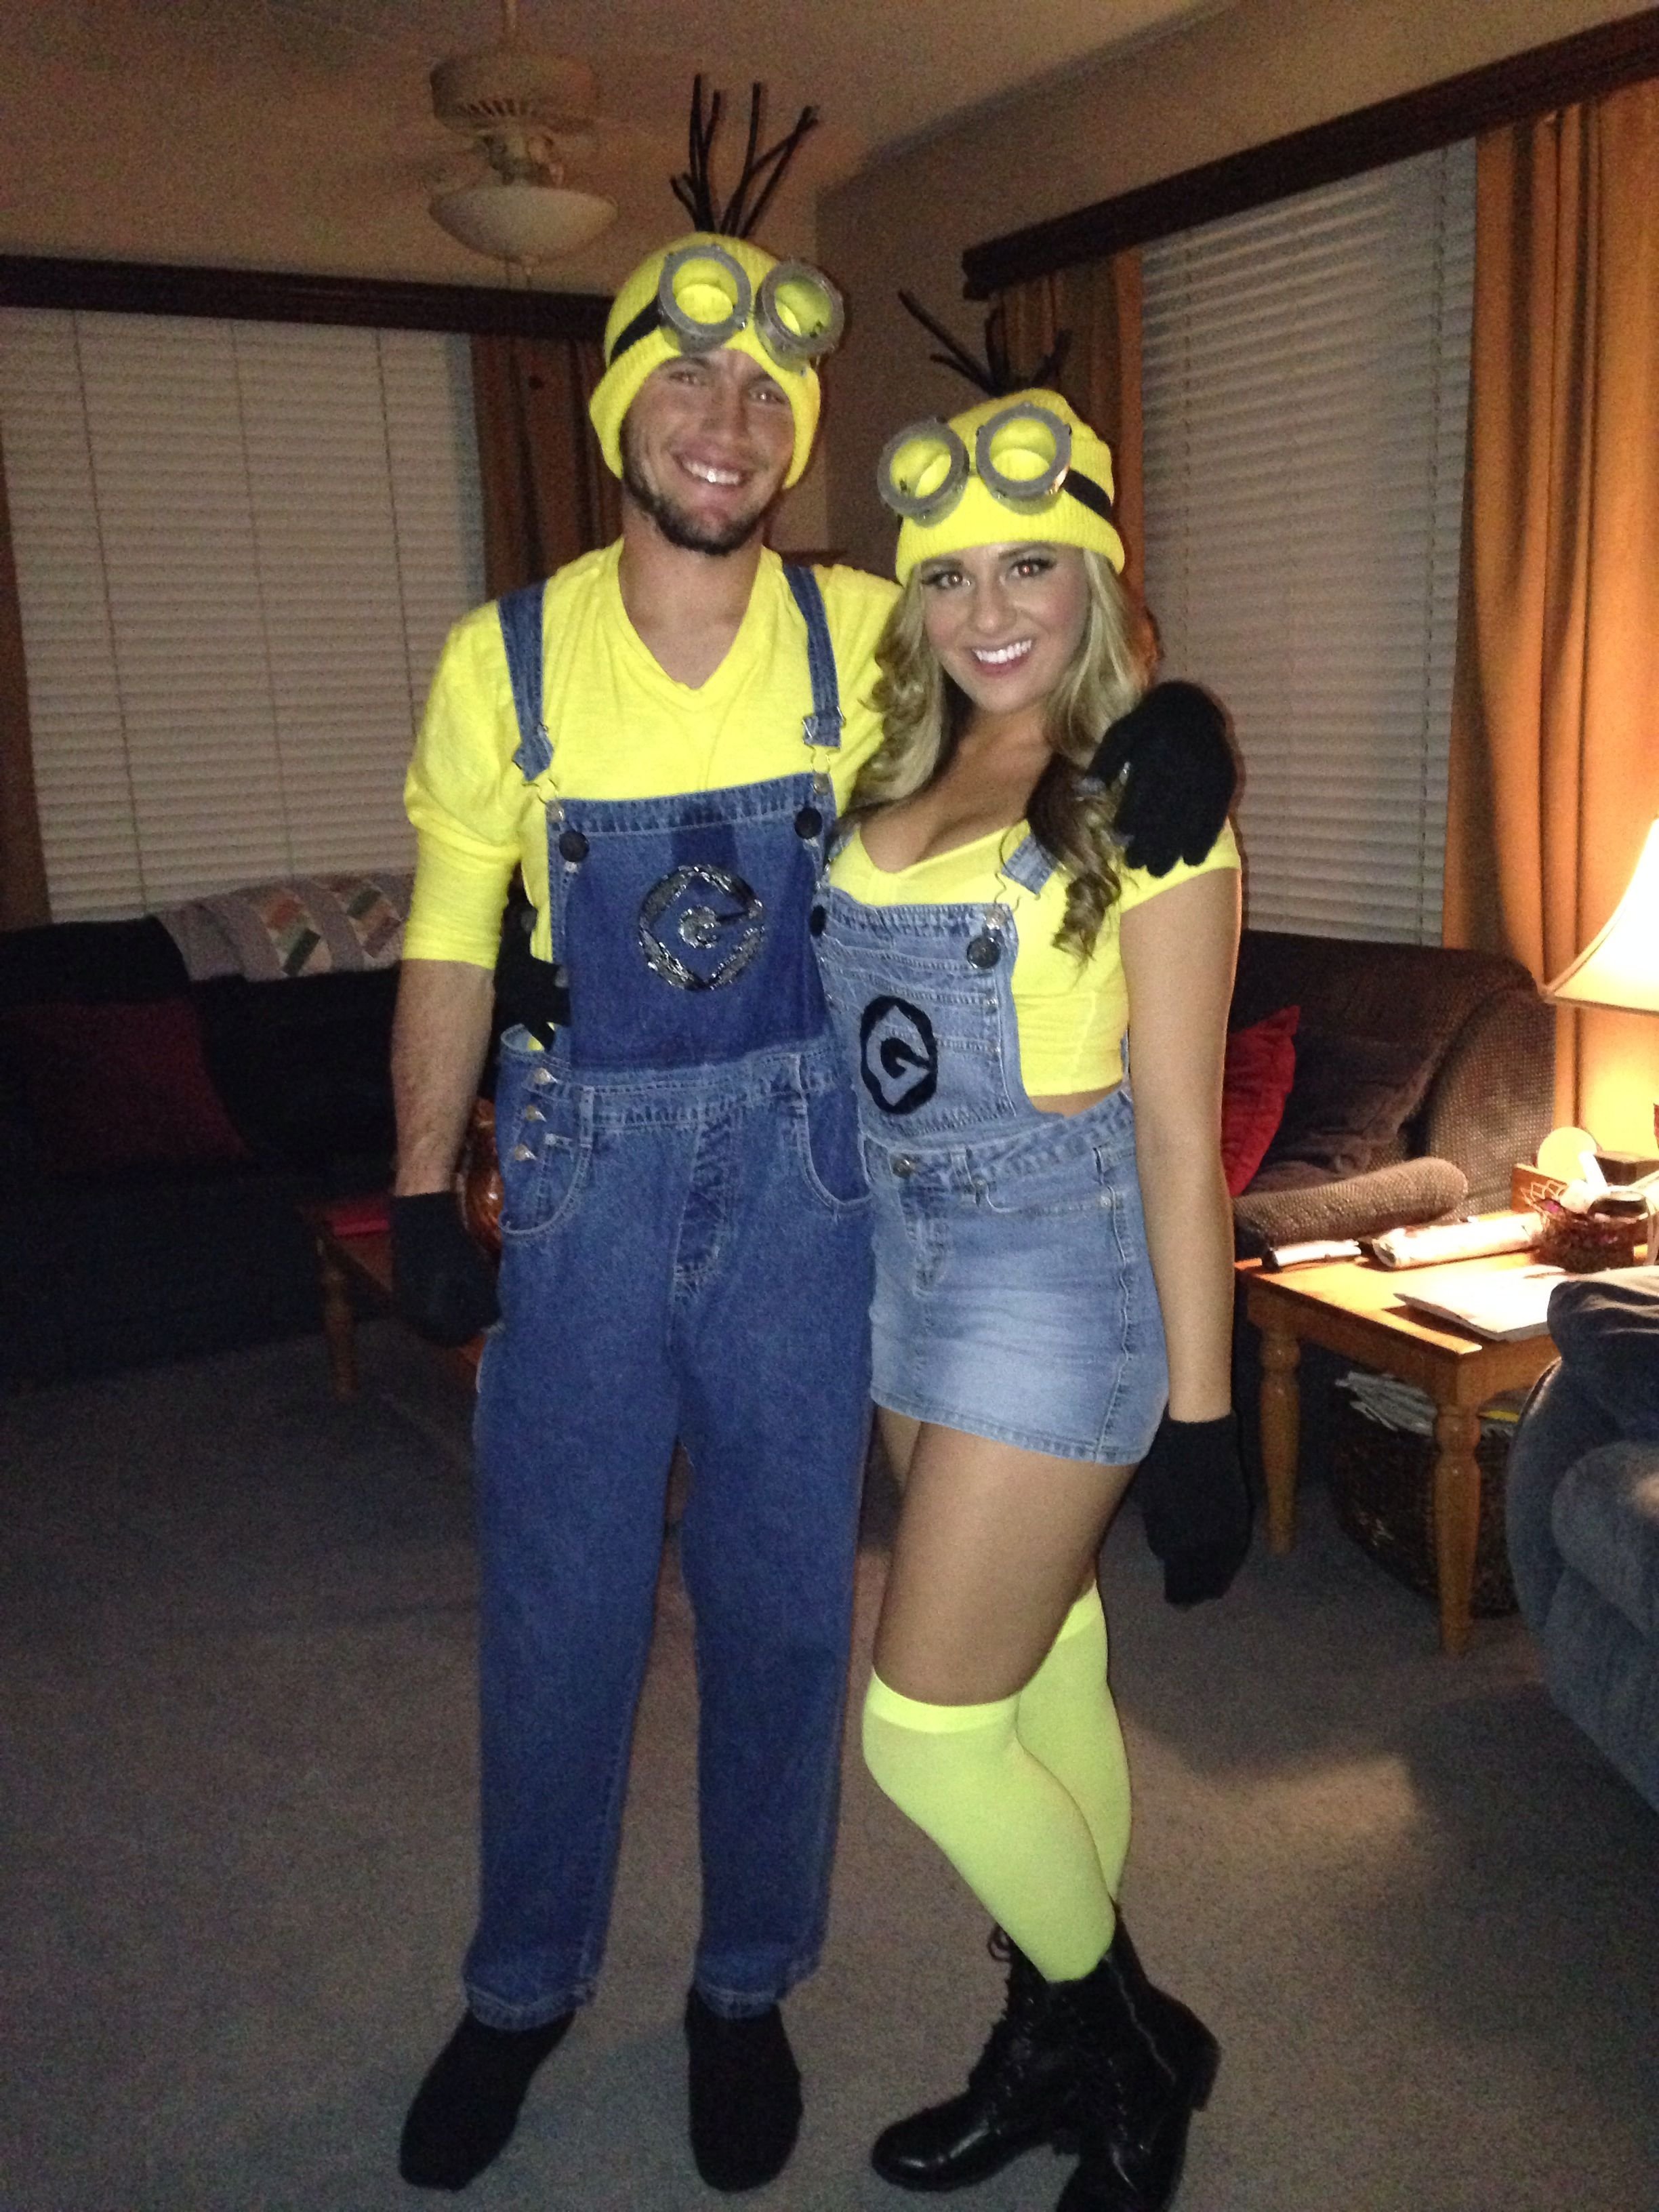 39 Easy Diy Halloween Costumes For Couples Info 44 Fashion Street 0819